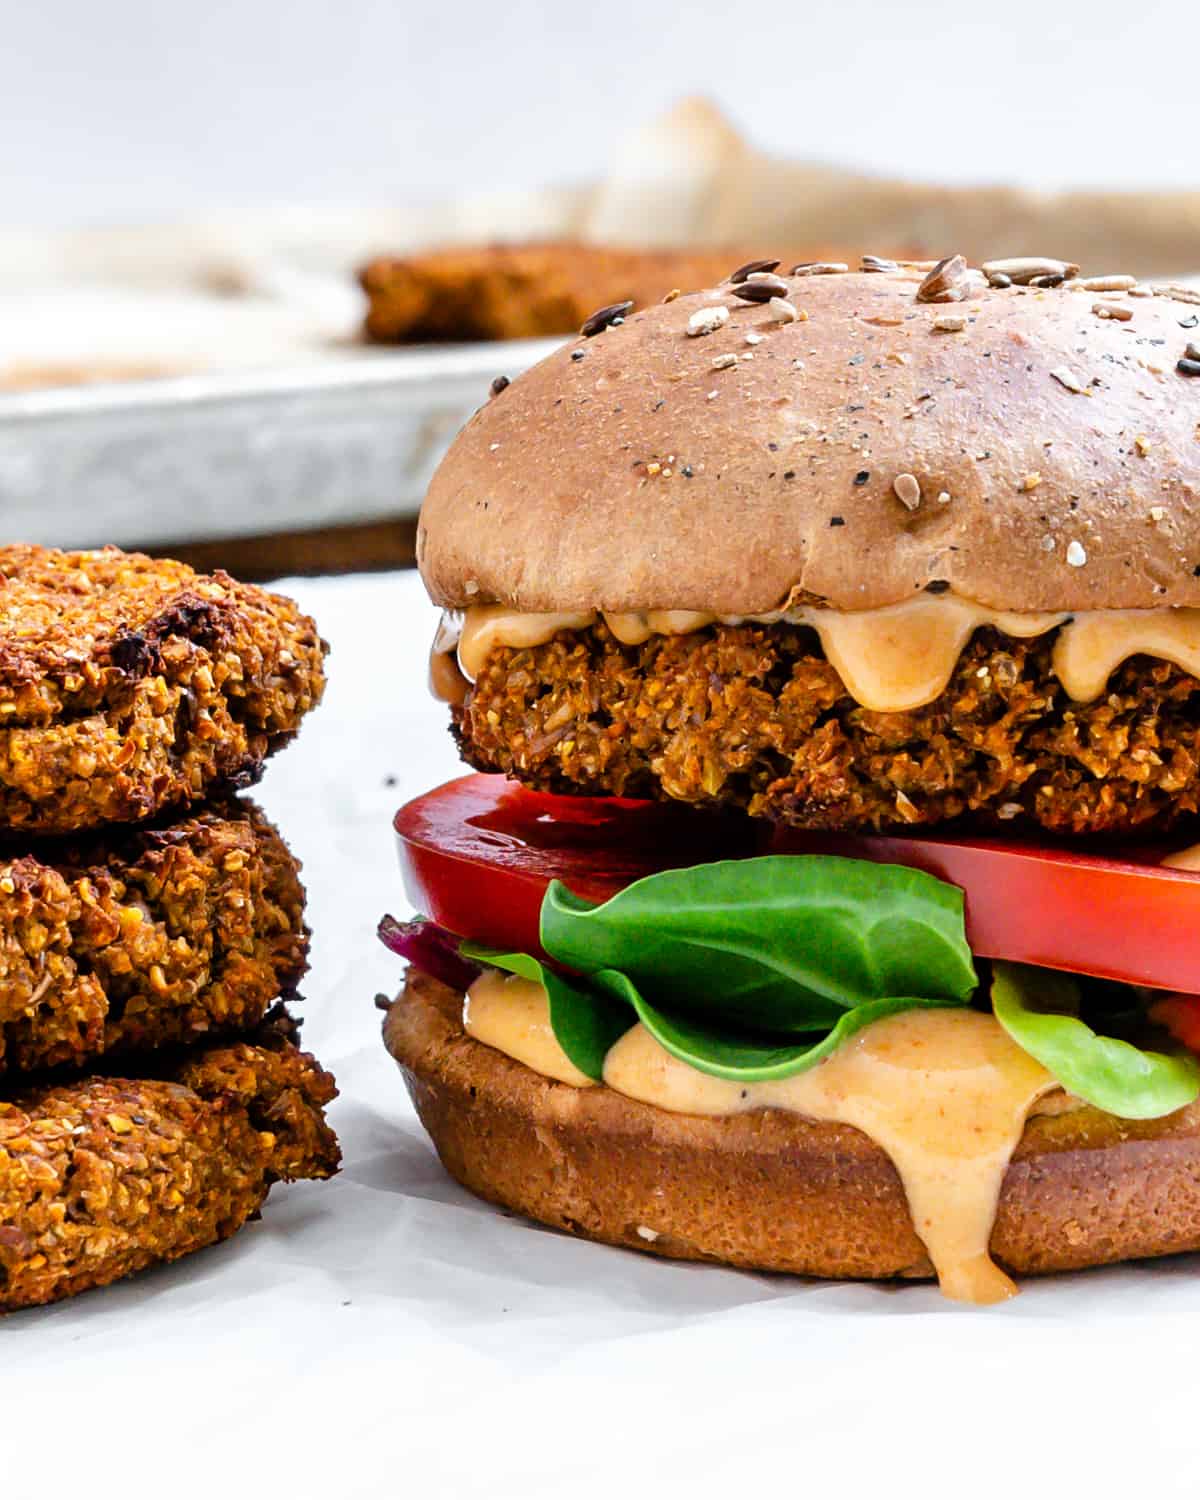 completed The Best Vegan Lentil Burgers on a white surface